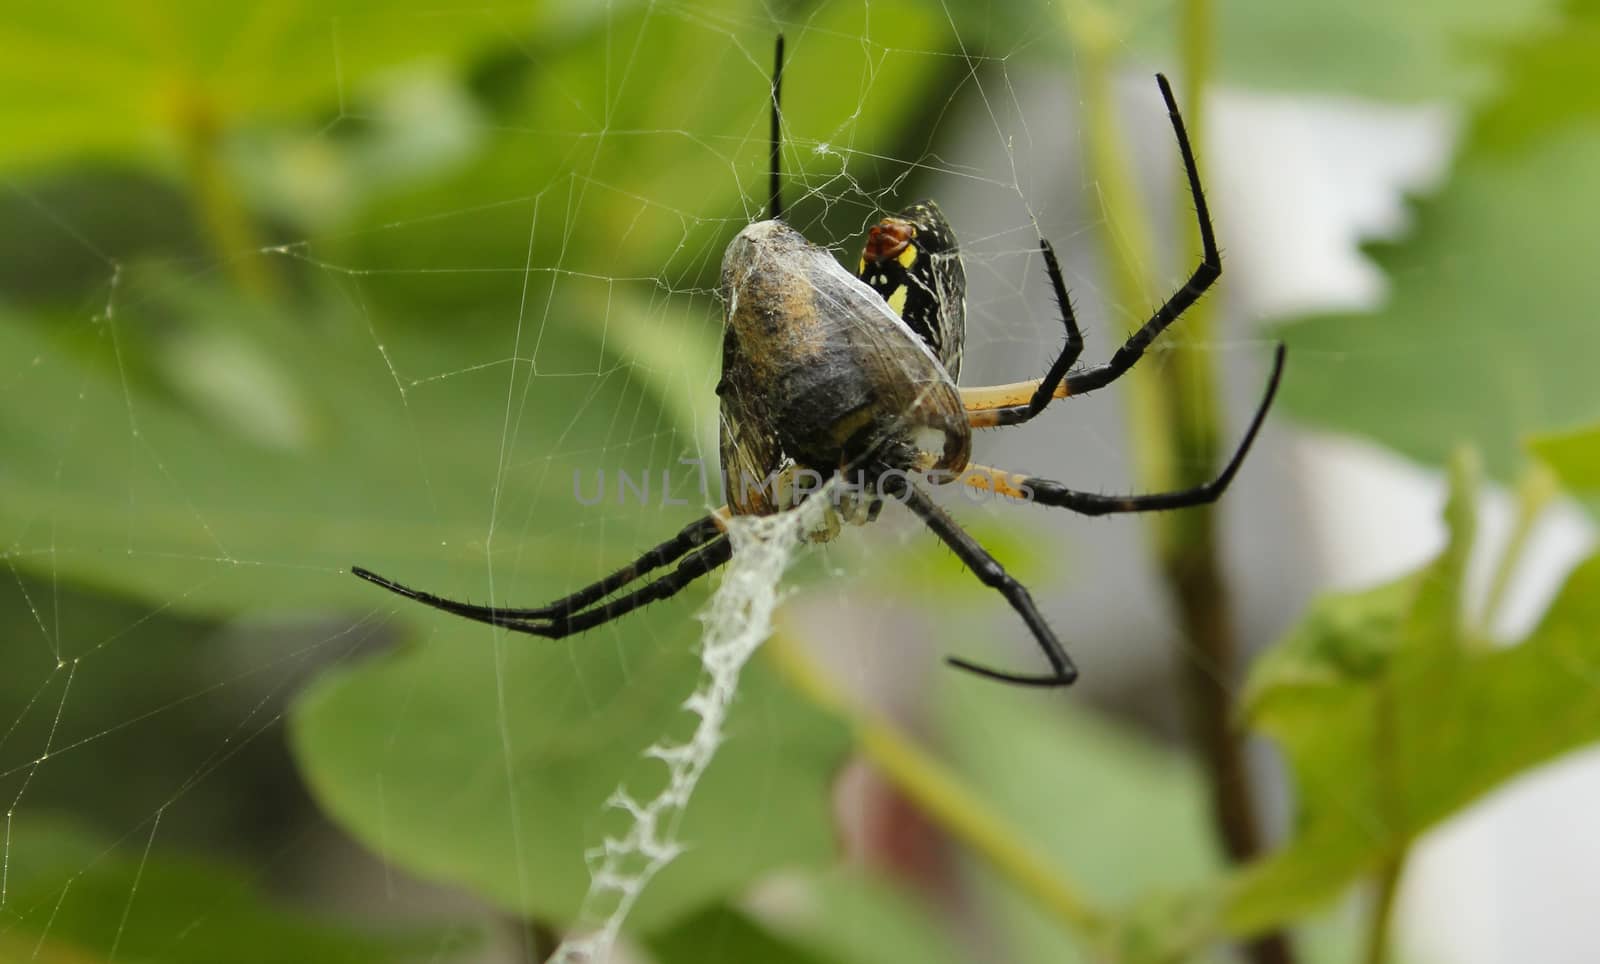 Black and Yellow Garden Spider by Marti157900